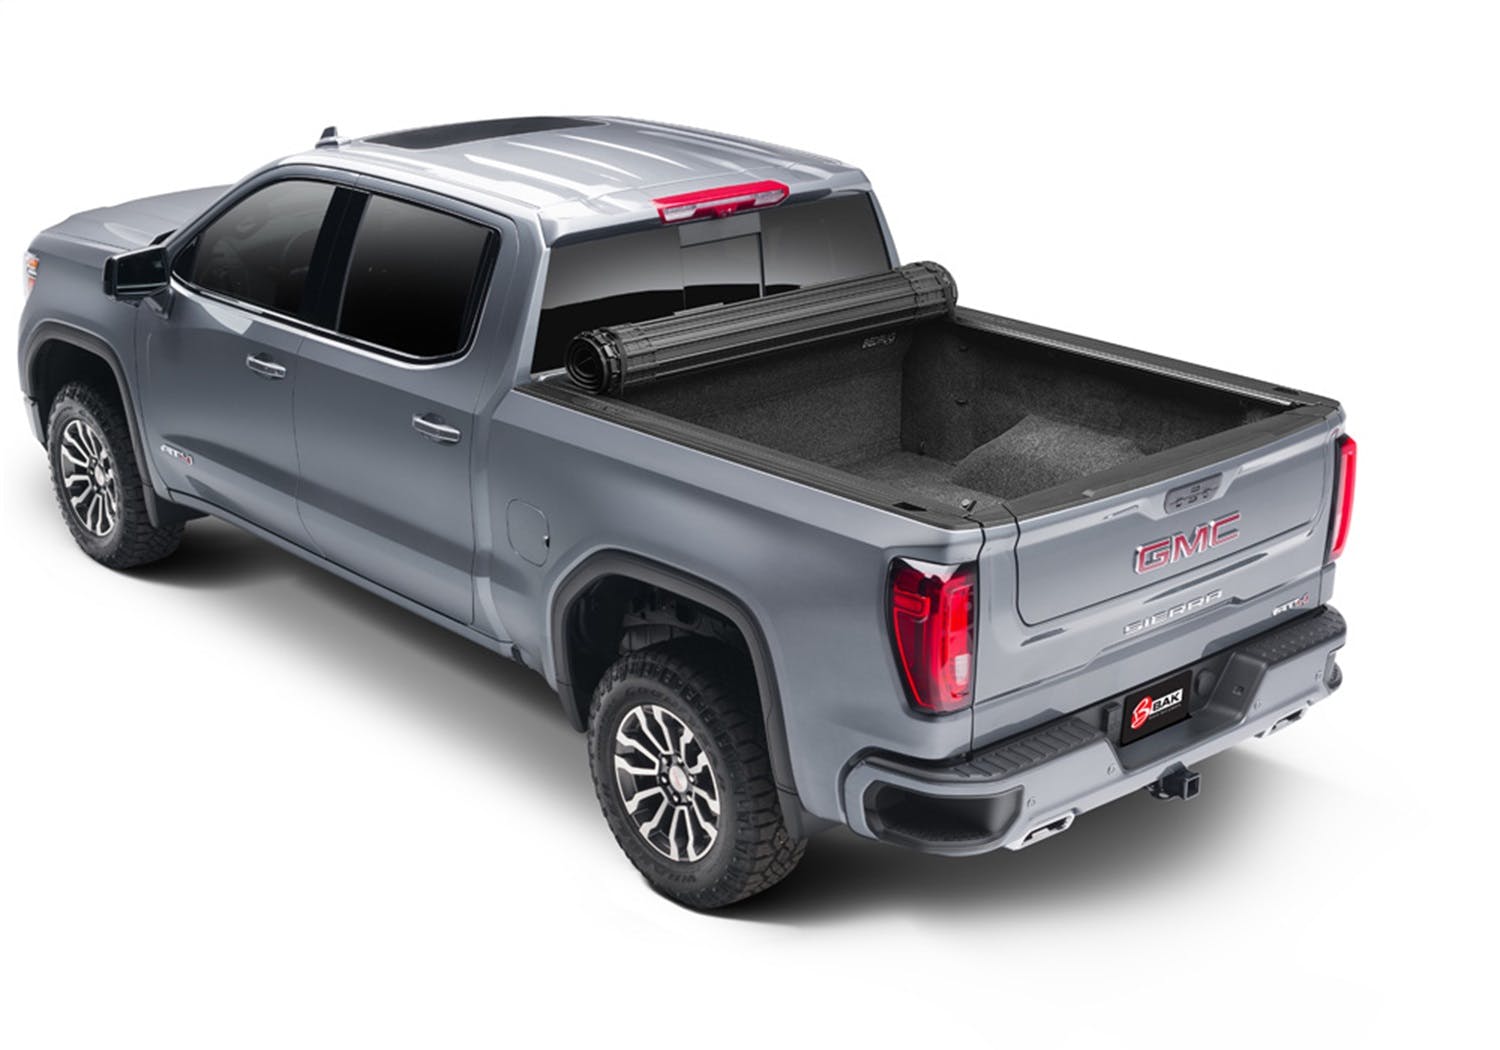 BAK Industries 80130 Revolver X4s Hard Rolling Truck Bed Cover